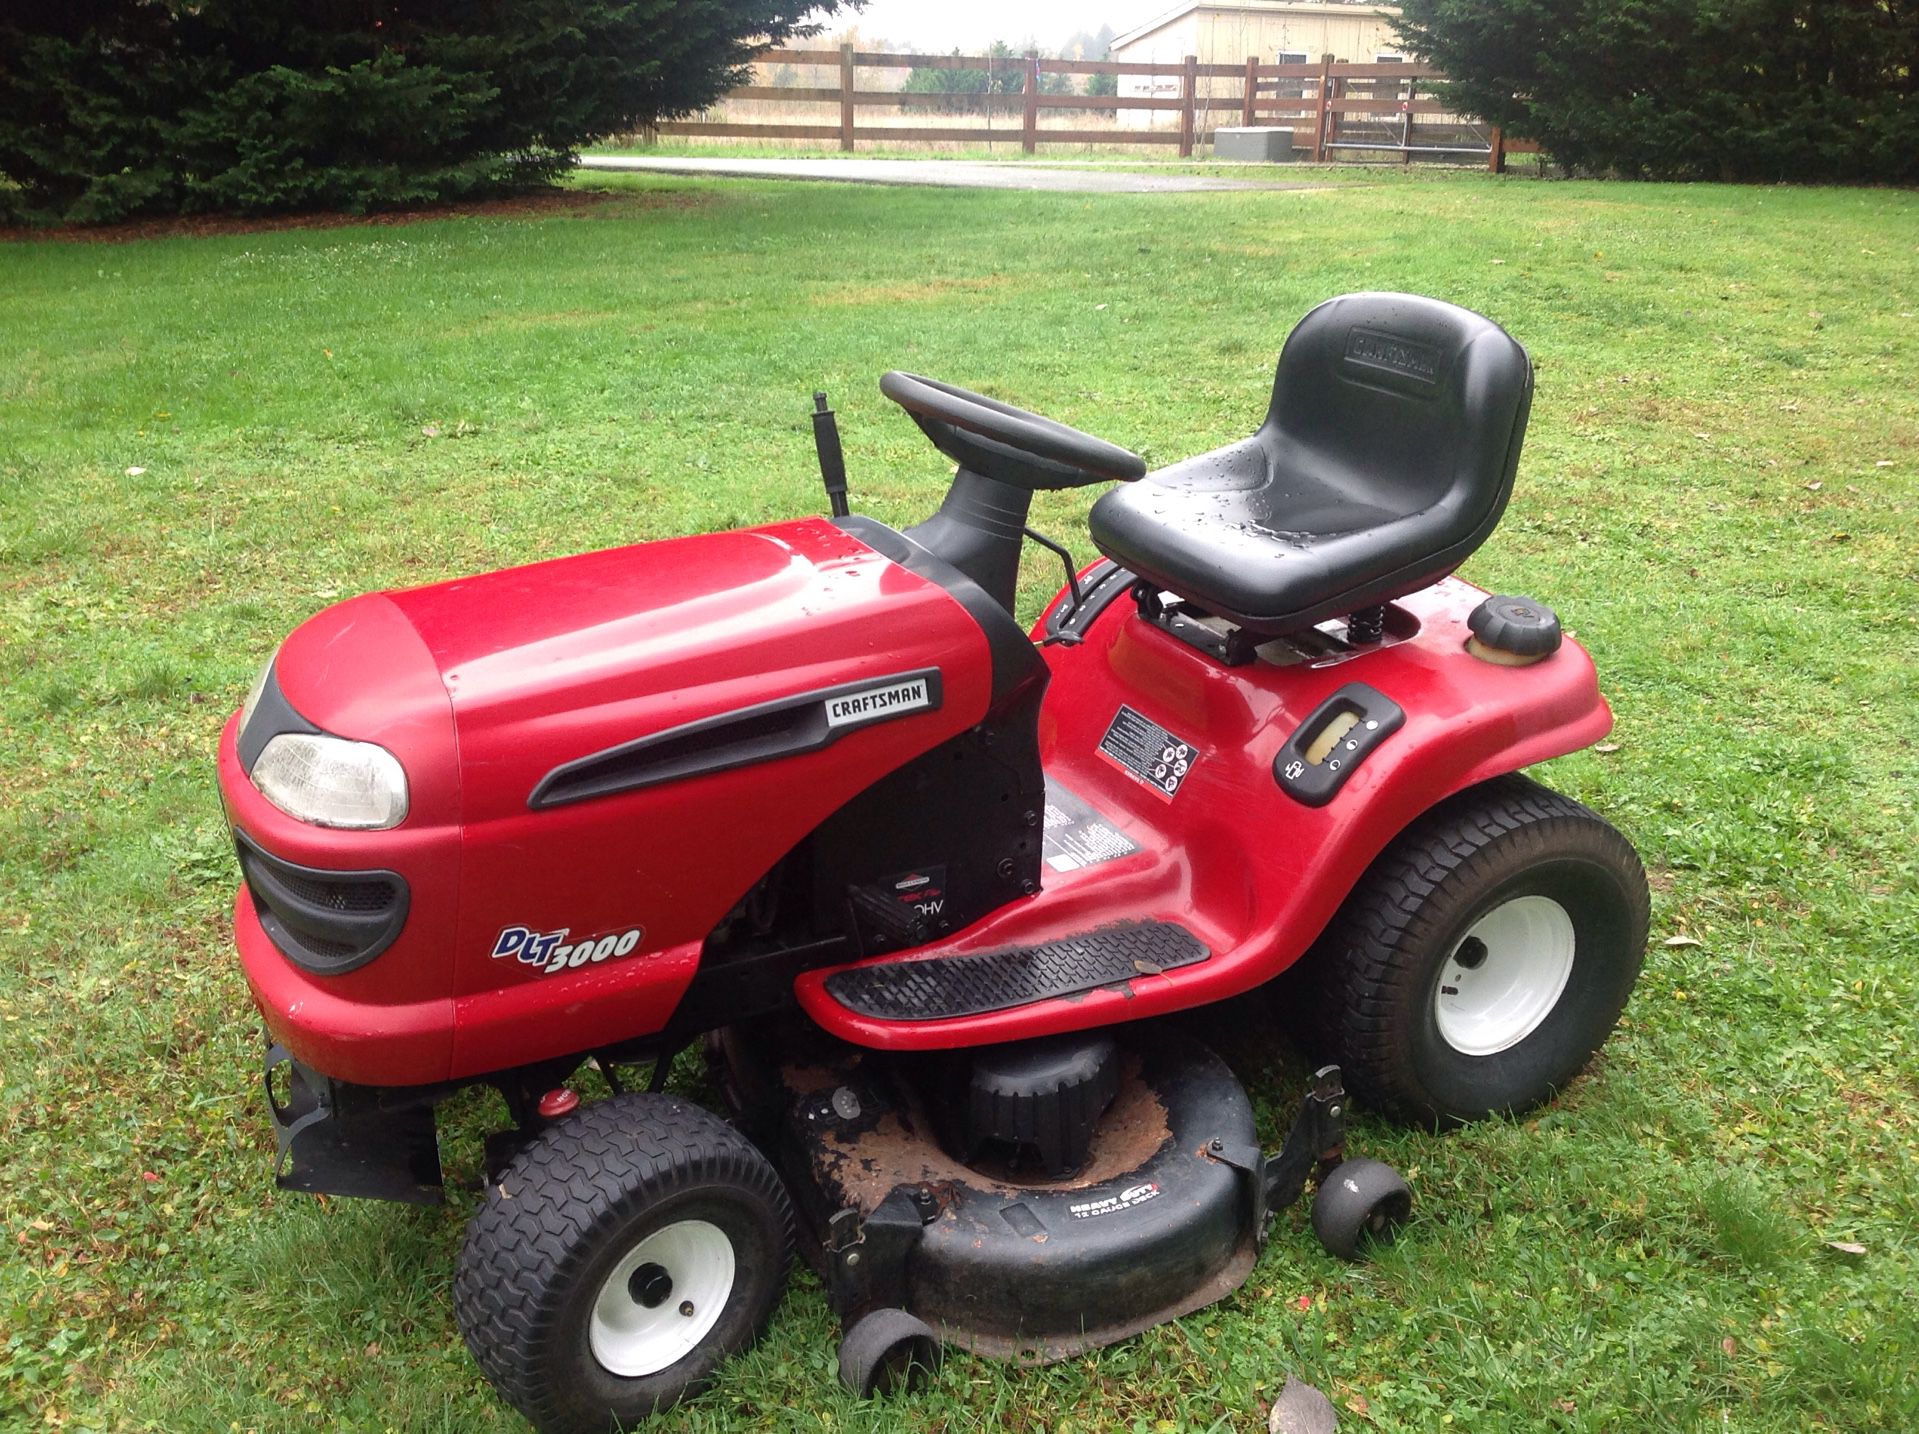 Craftsman riding lawnmower. Needs tuneup and possible carburetor.